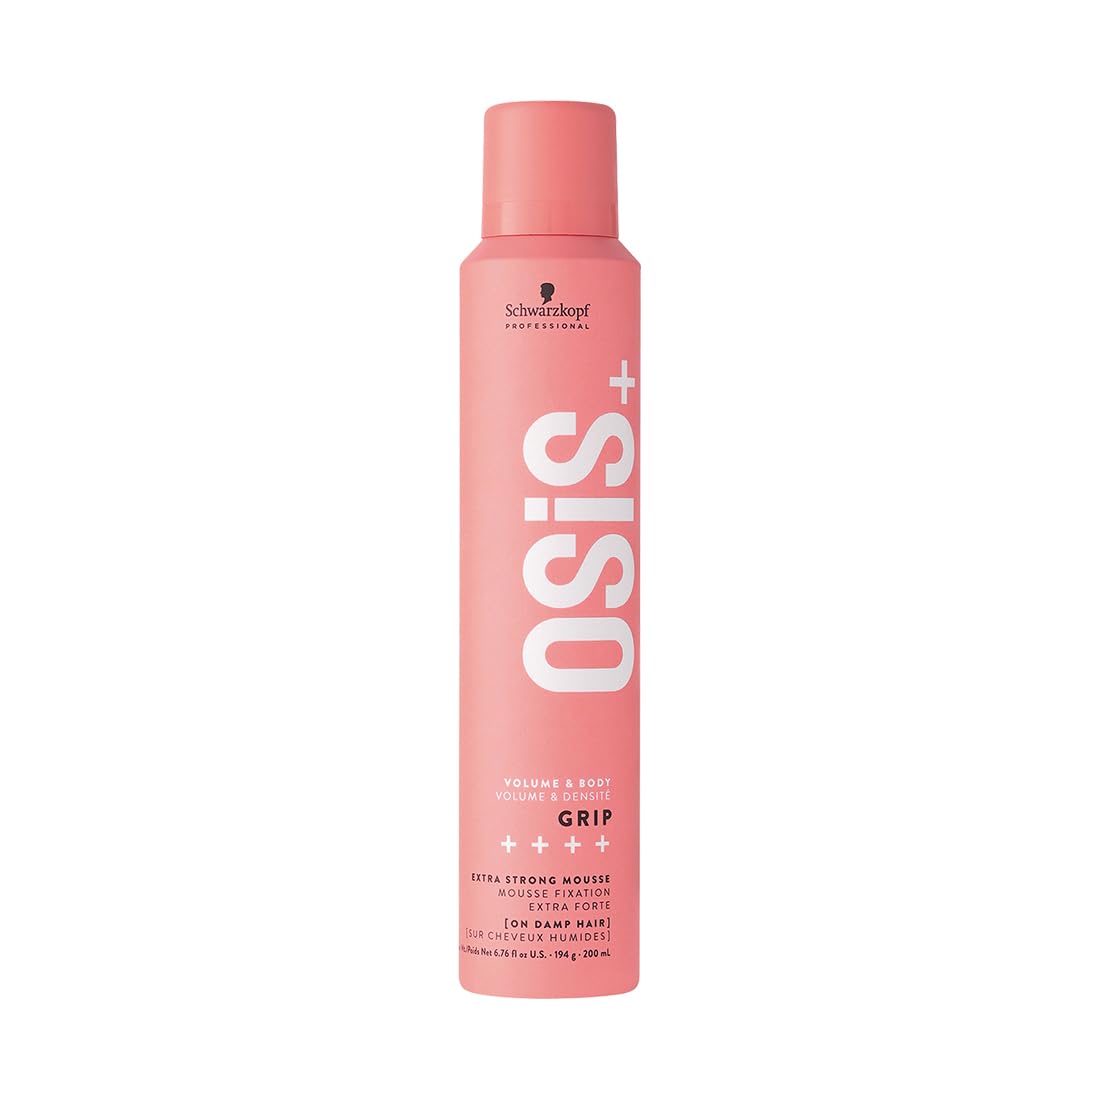 OSiS grip extra strong mousse